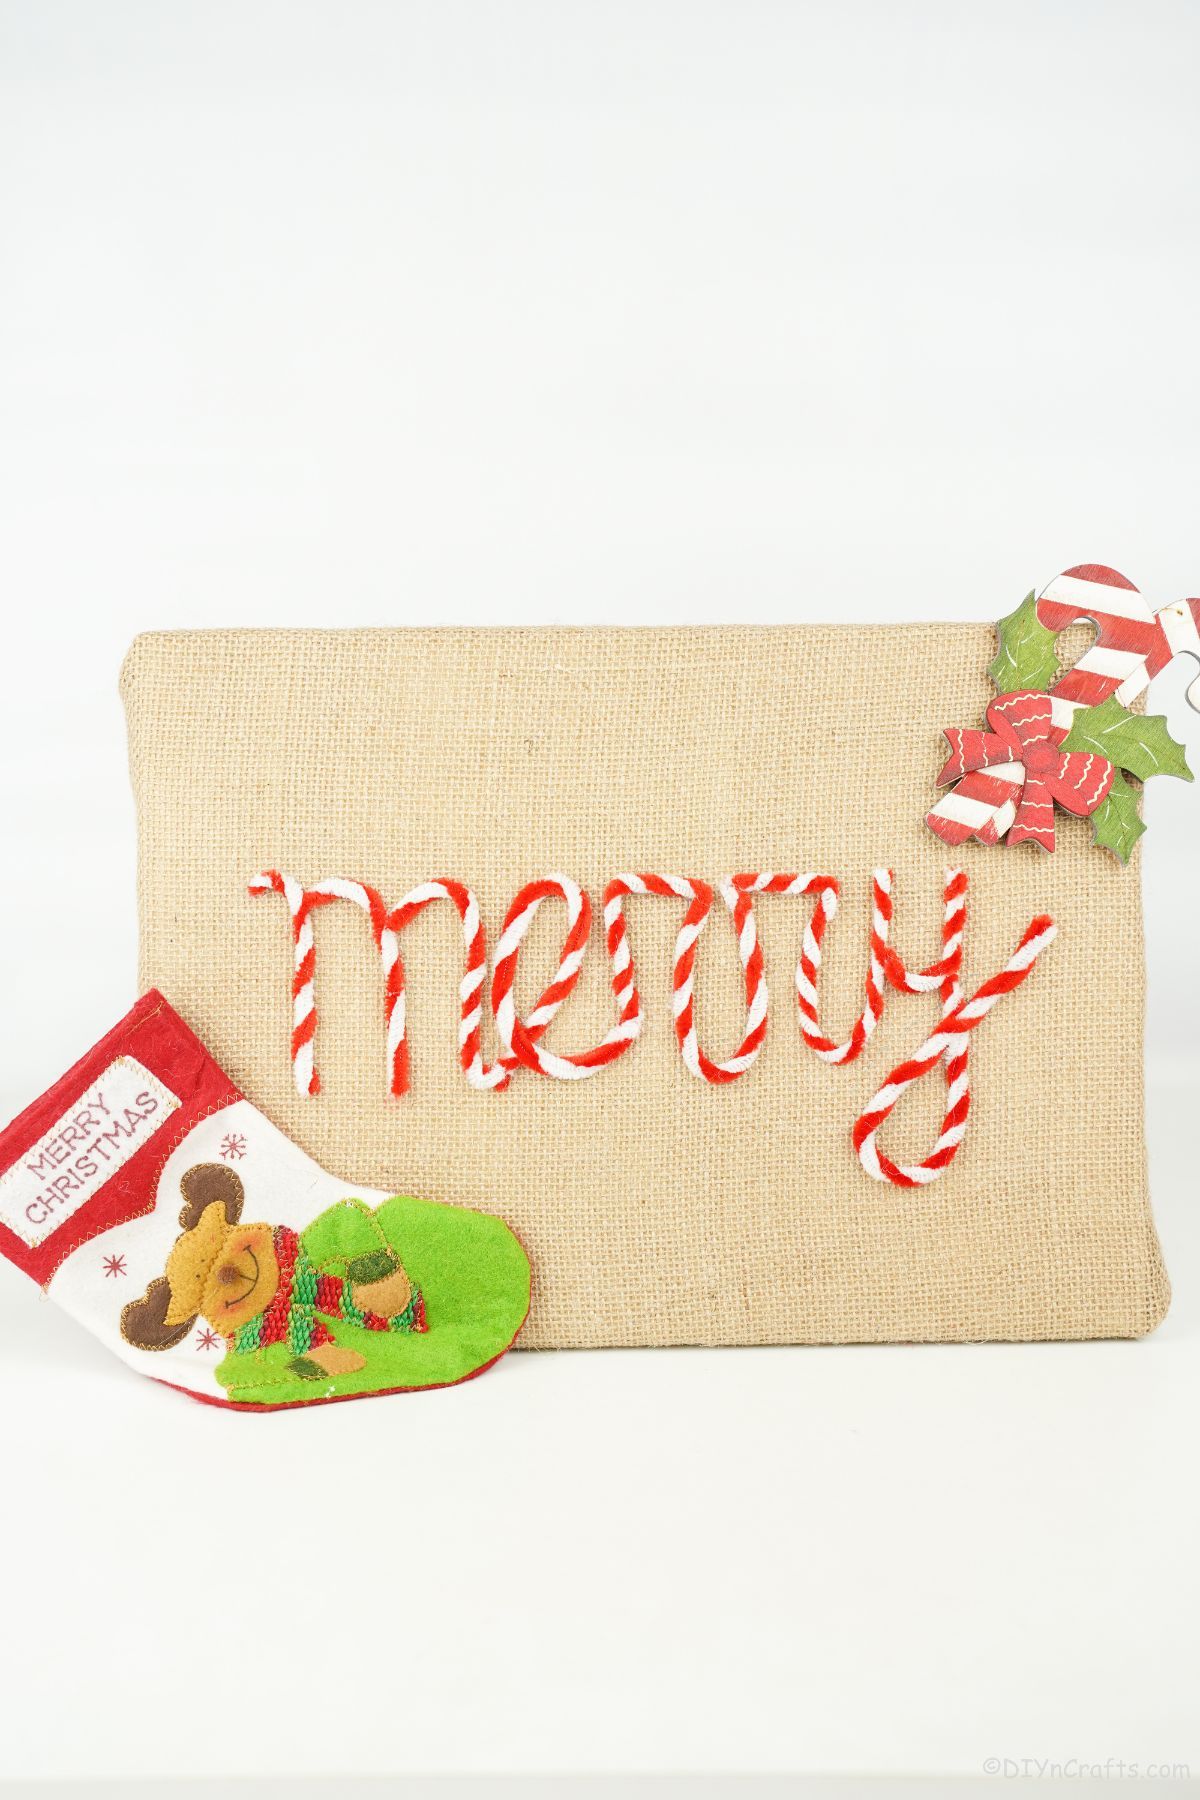 Christmas sign made of burlap on white wall